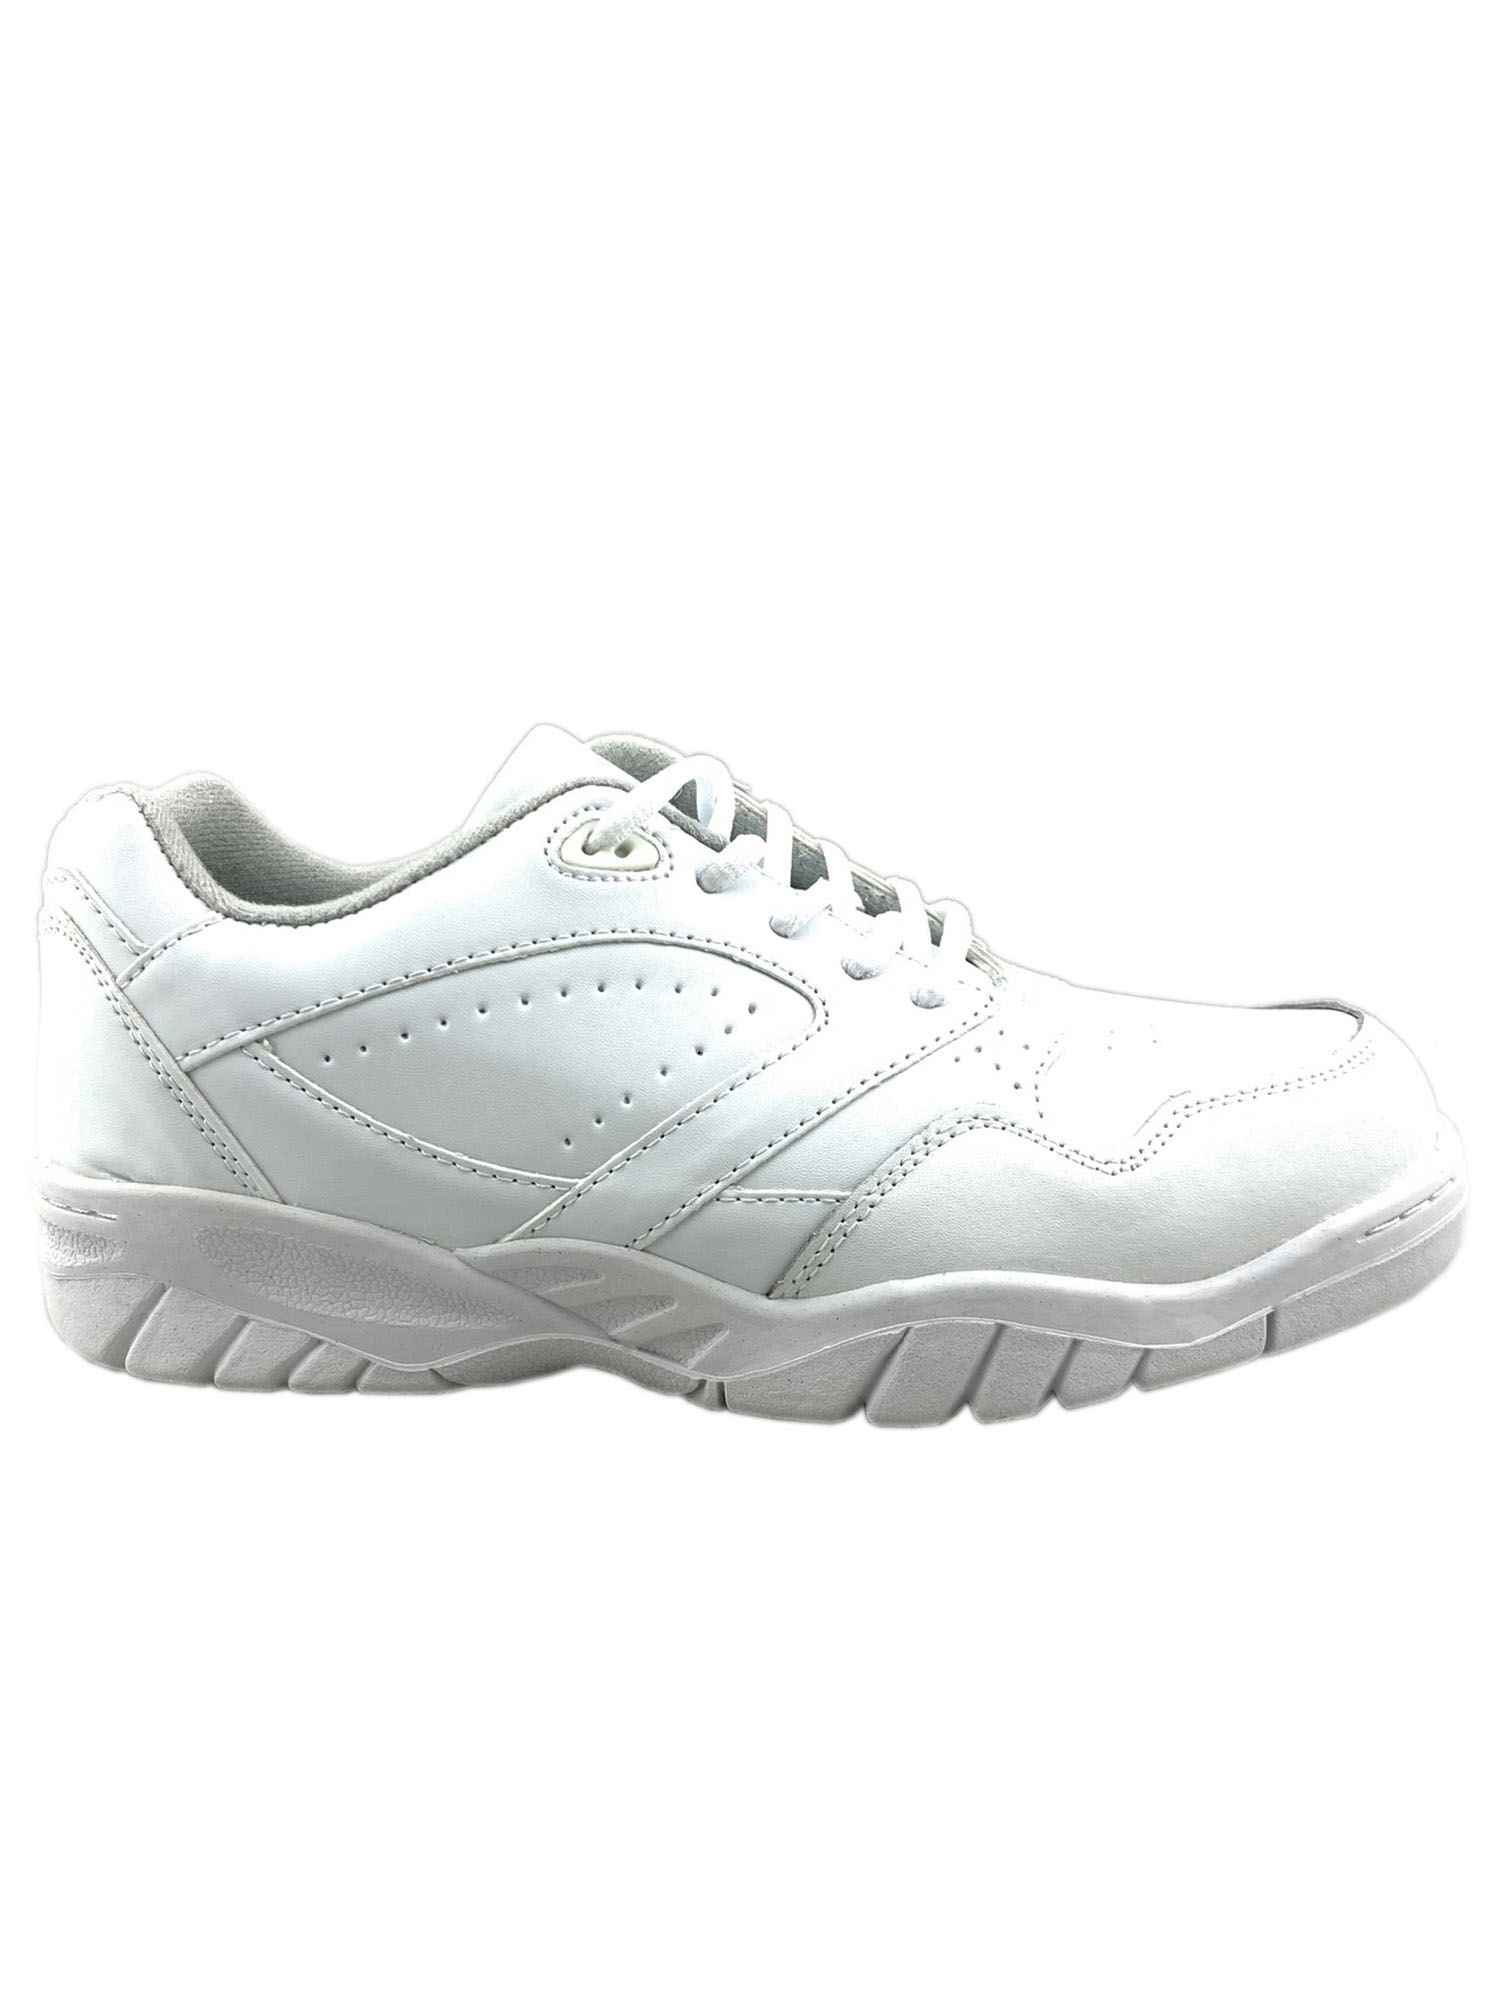 Tanleewa Men's Leather White Sports Shoes Lightweight Sneakers Breathable Casual Shoe Size 4.5 - image 1 of 5